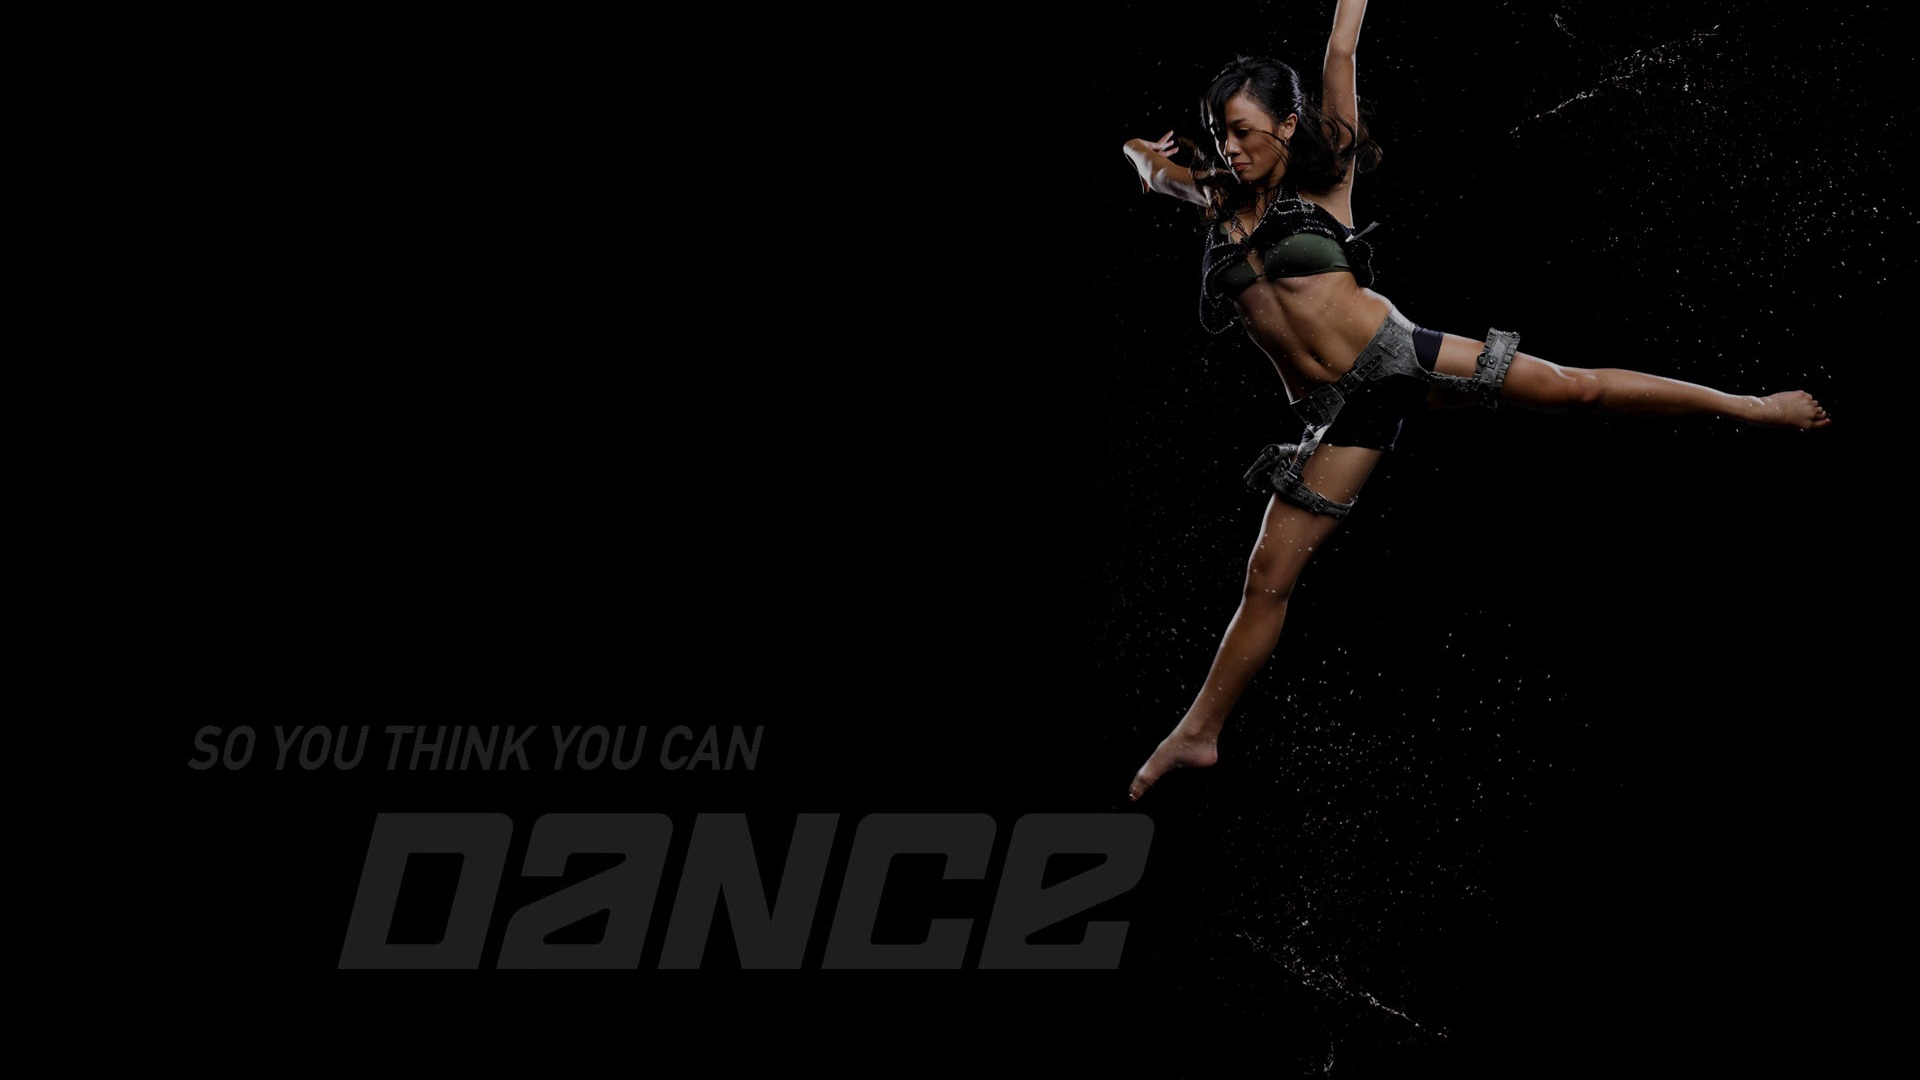 So You Think You Can Dance wallpaper (2) #3 - 1920x1080